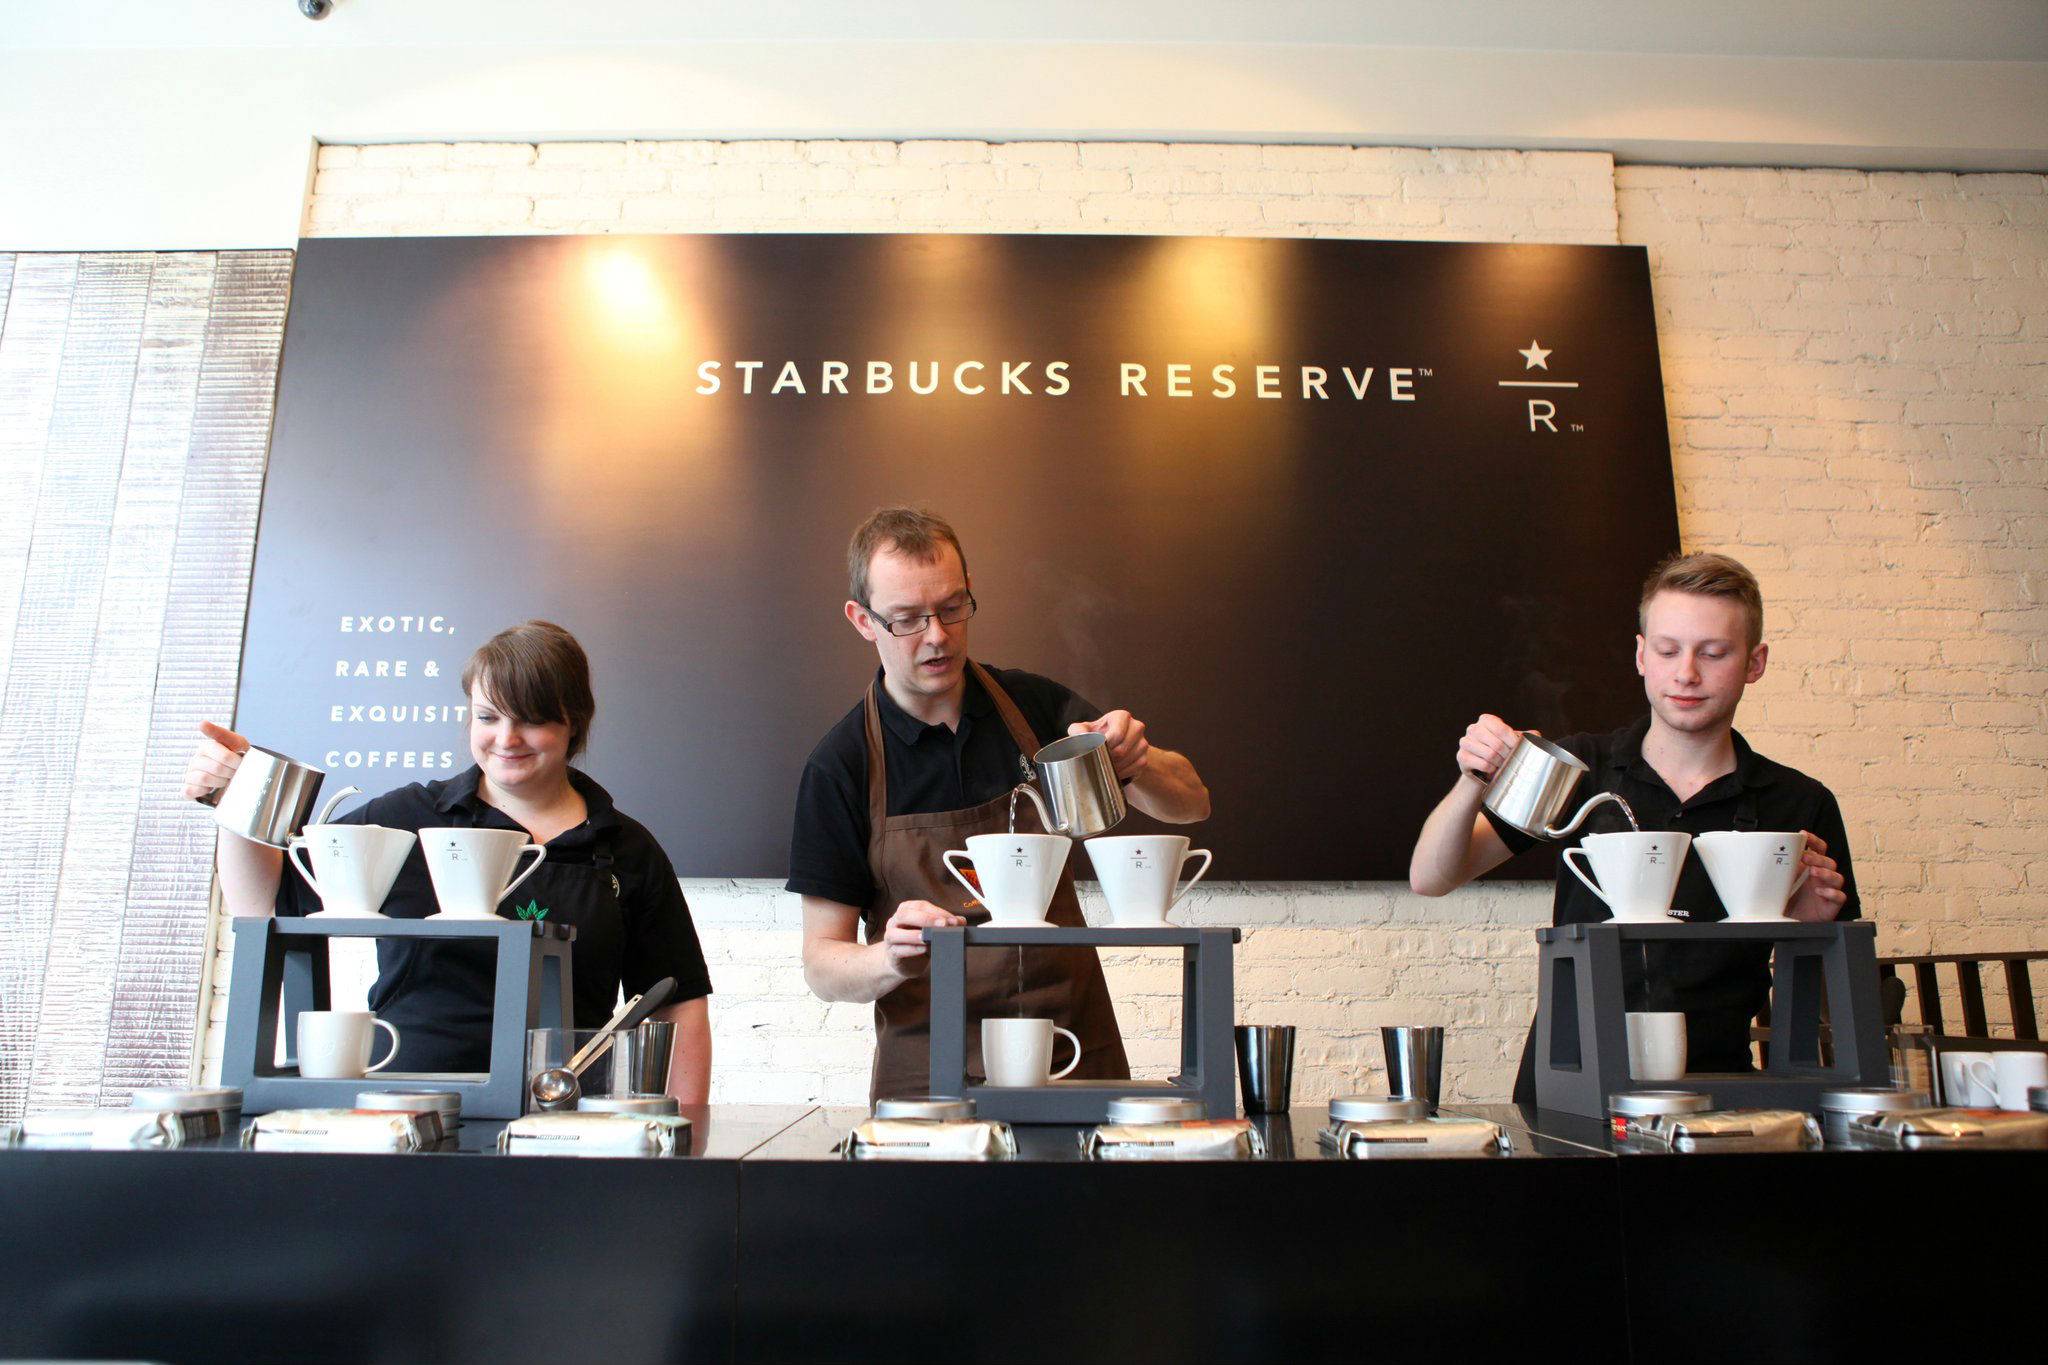 Starbucks Reserve bar appeals to craft coffee fans